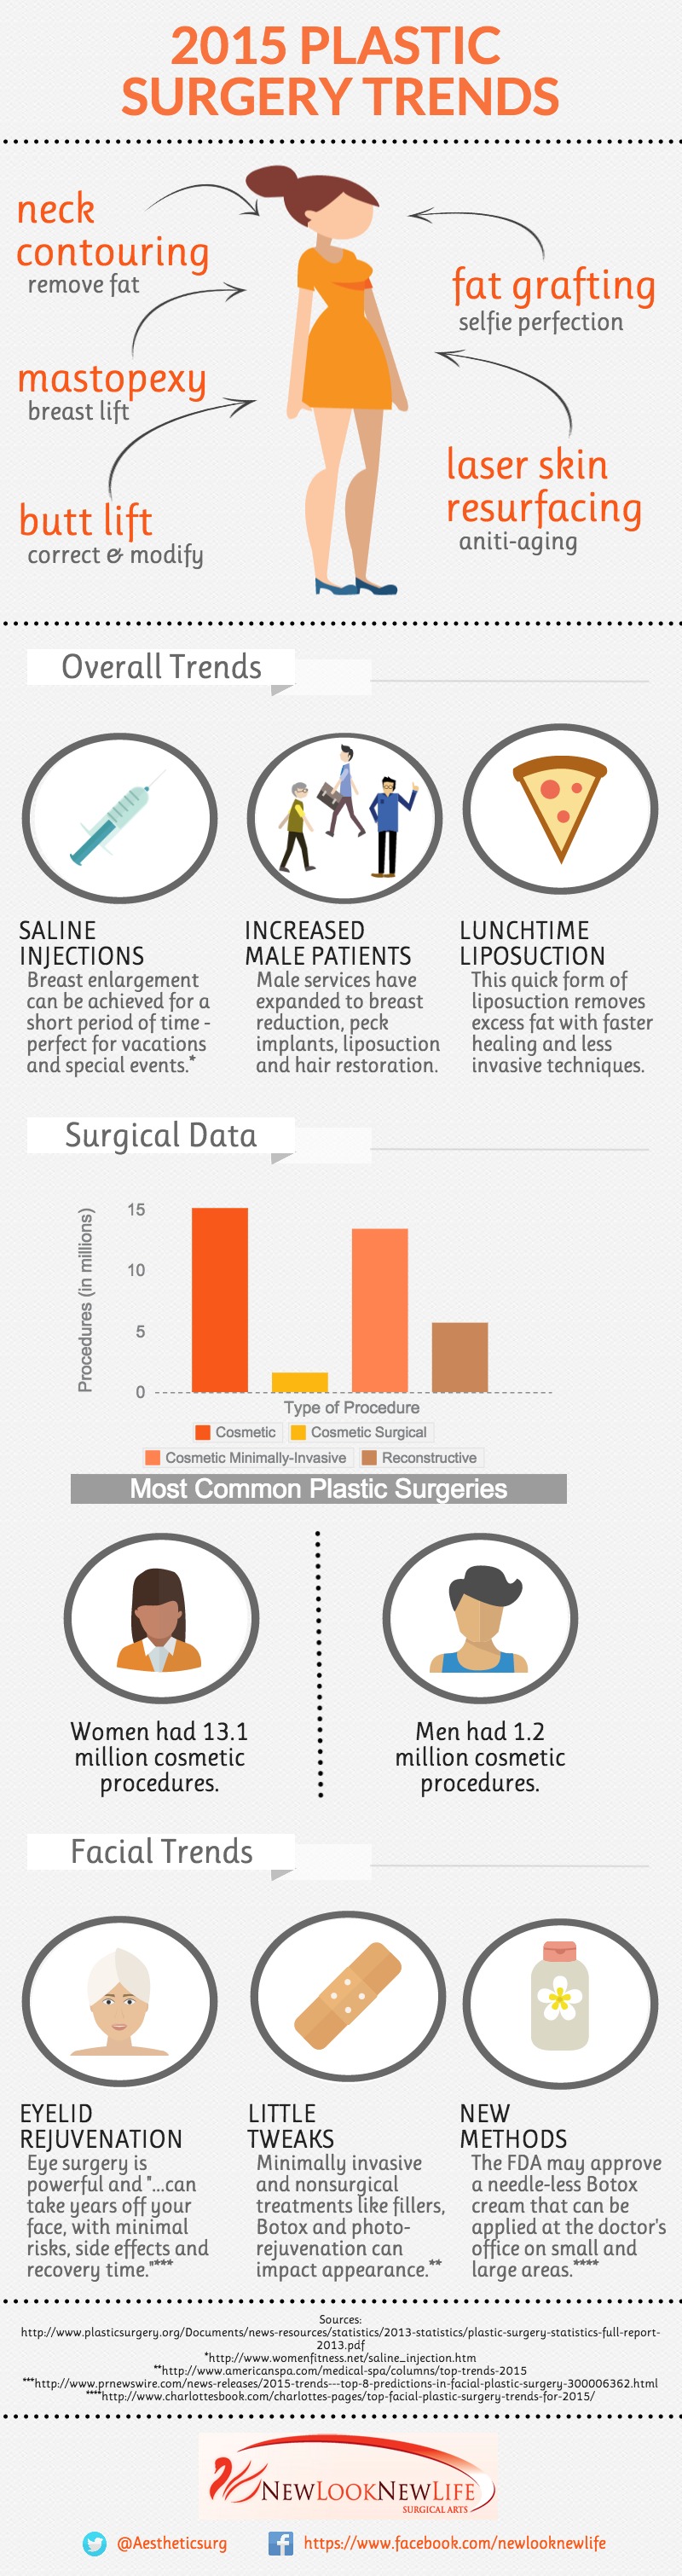 NLNL-Plastic-Surgery-trends-for-2015